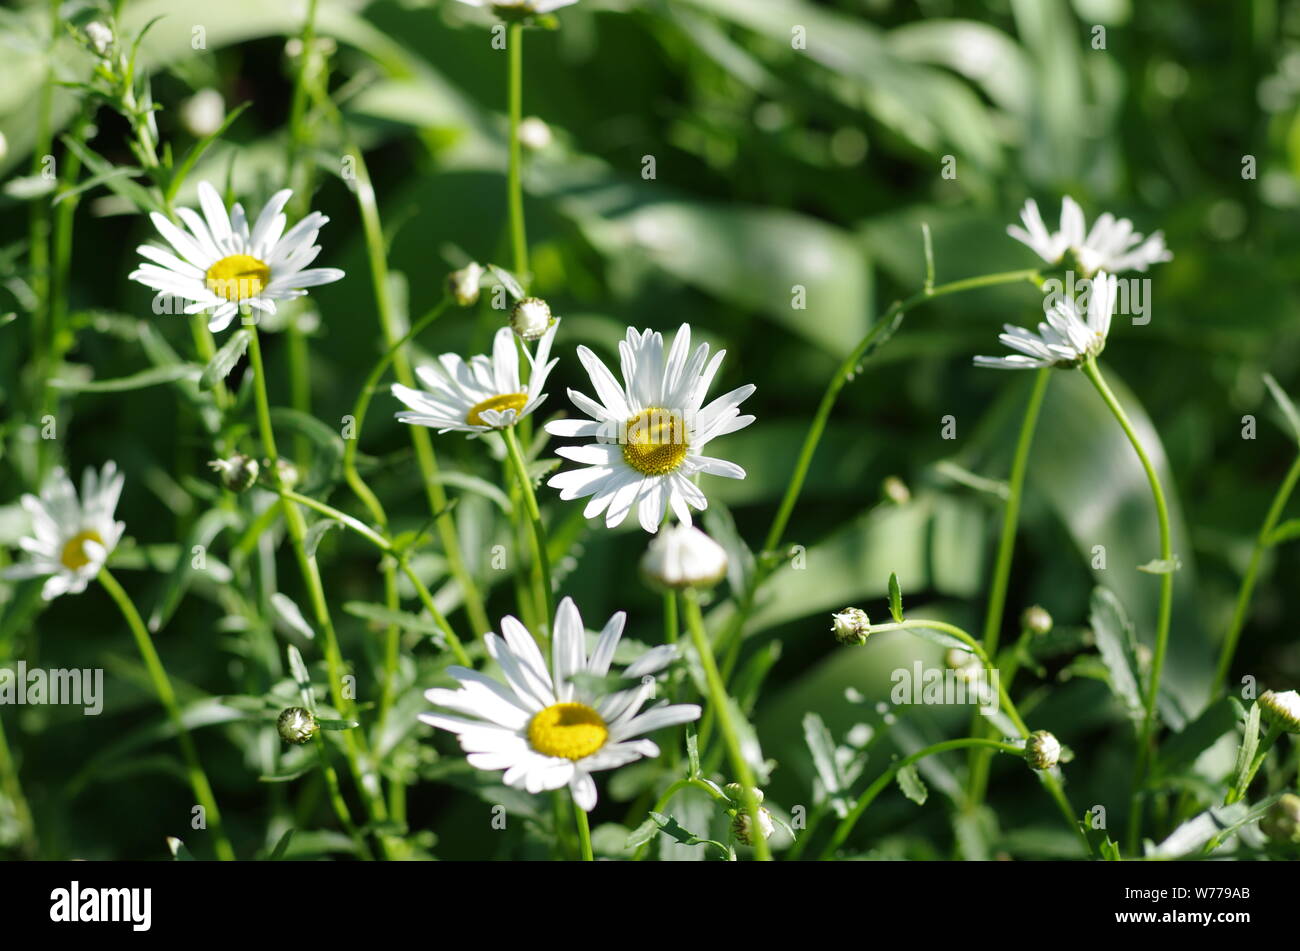 Daisies at the sun light, flowerbed, green leaves, field Stock Photo